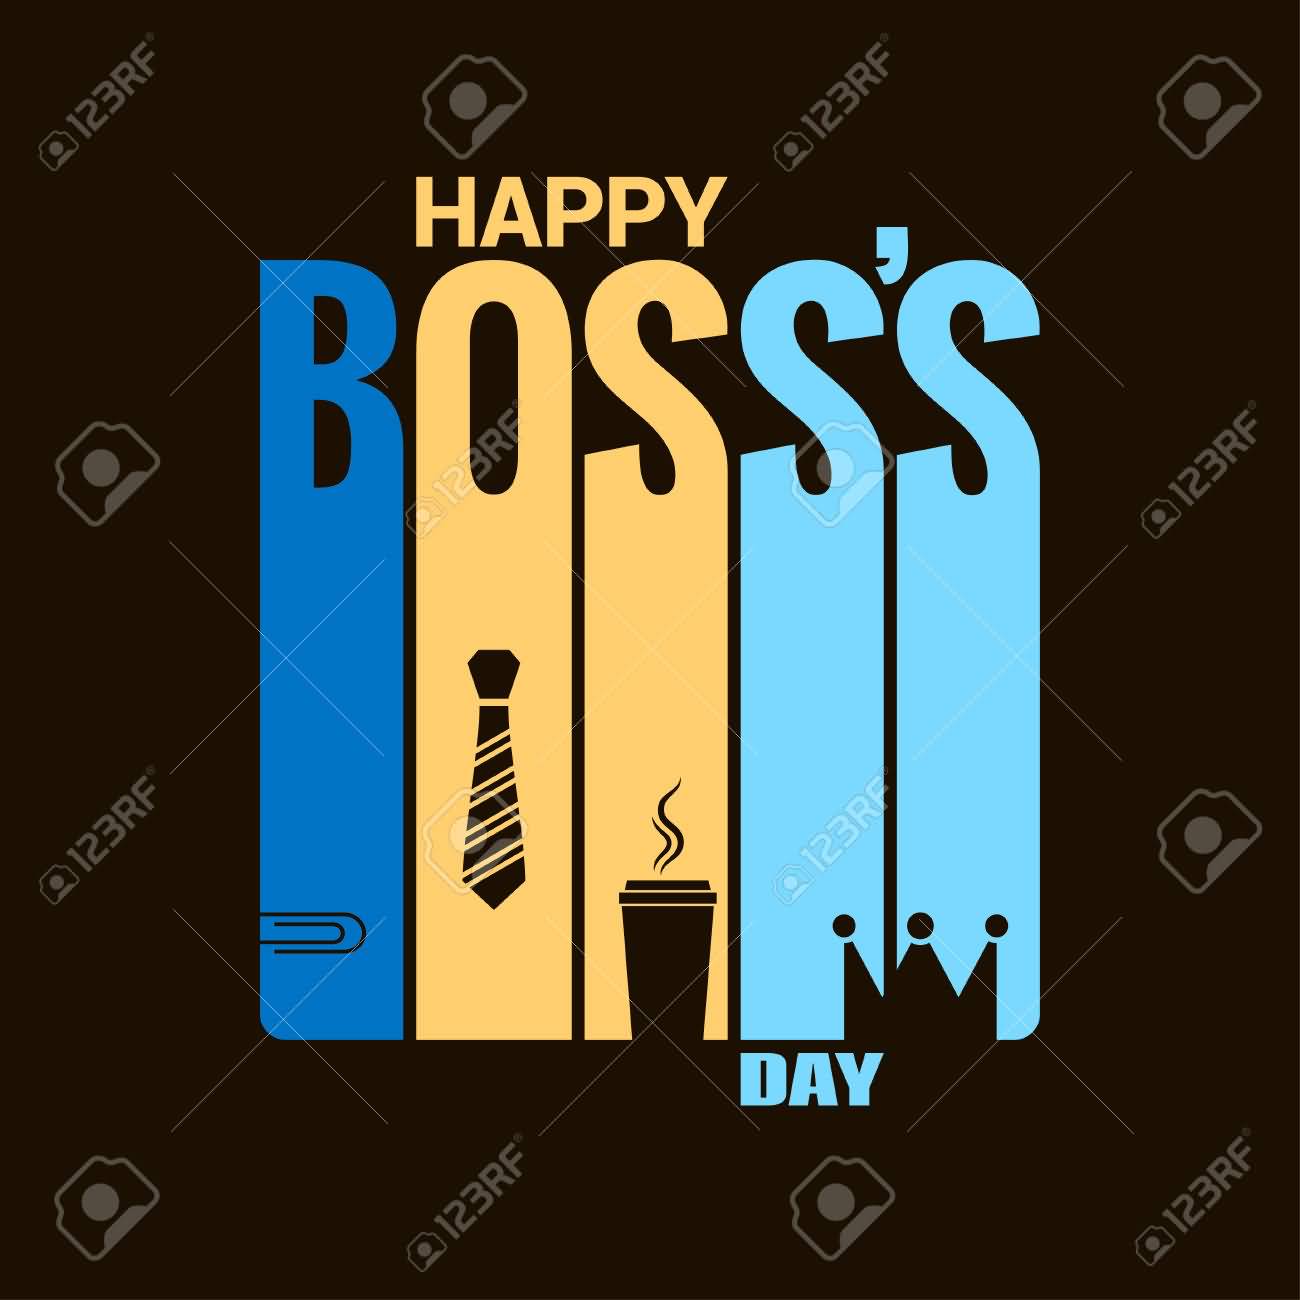 Happy Boss's Day Greeting Card